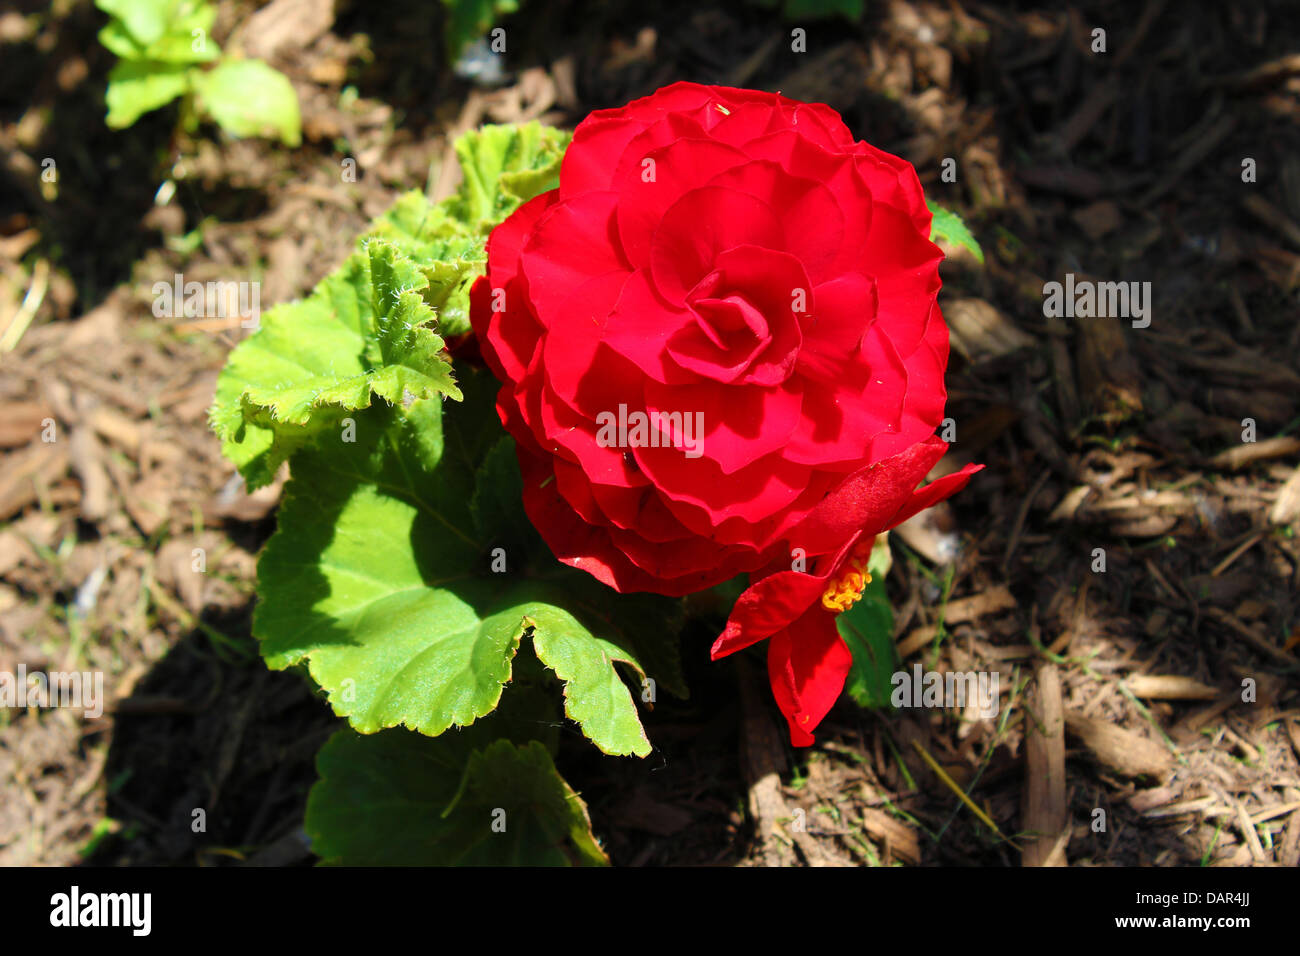 The Begonia flower is a subtropical and tropical perennial plant. Stock Photo